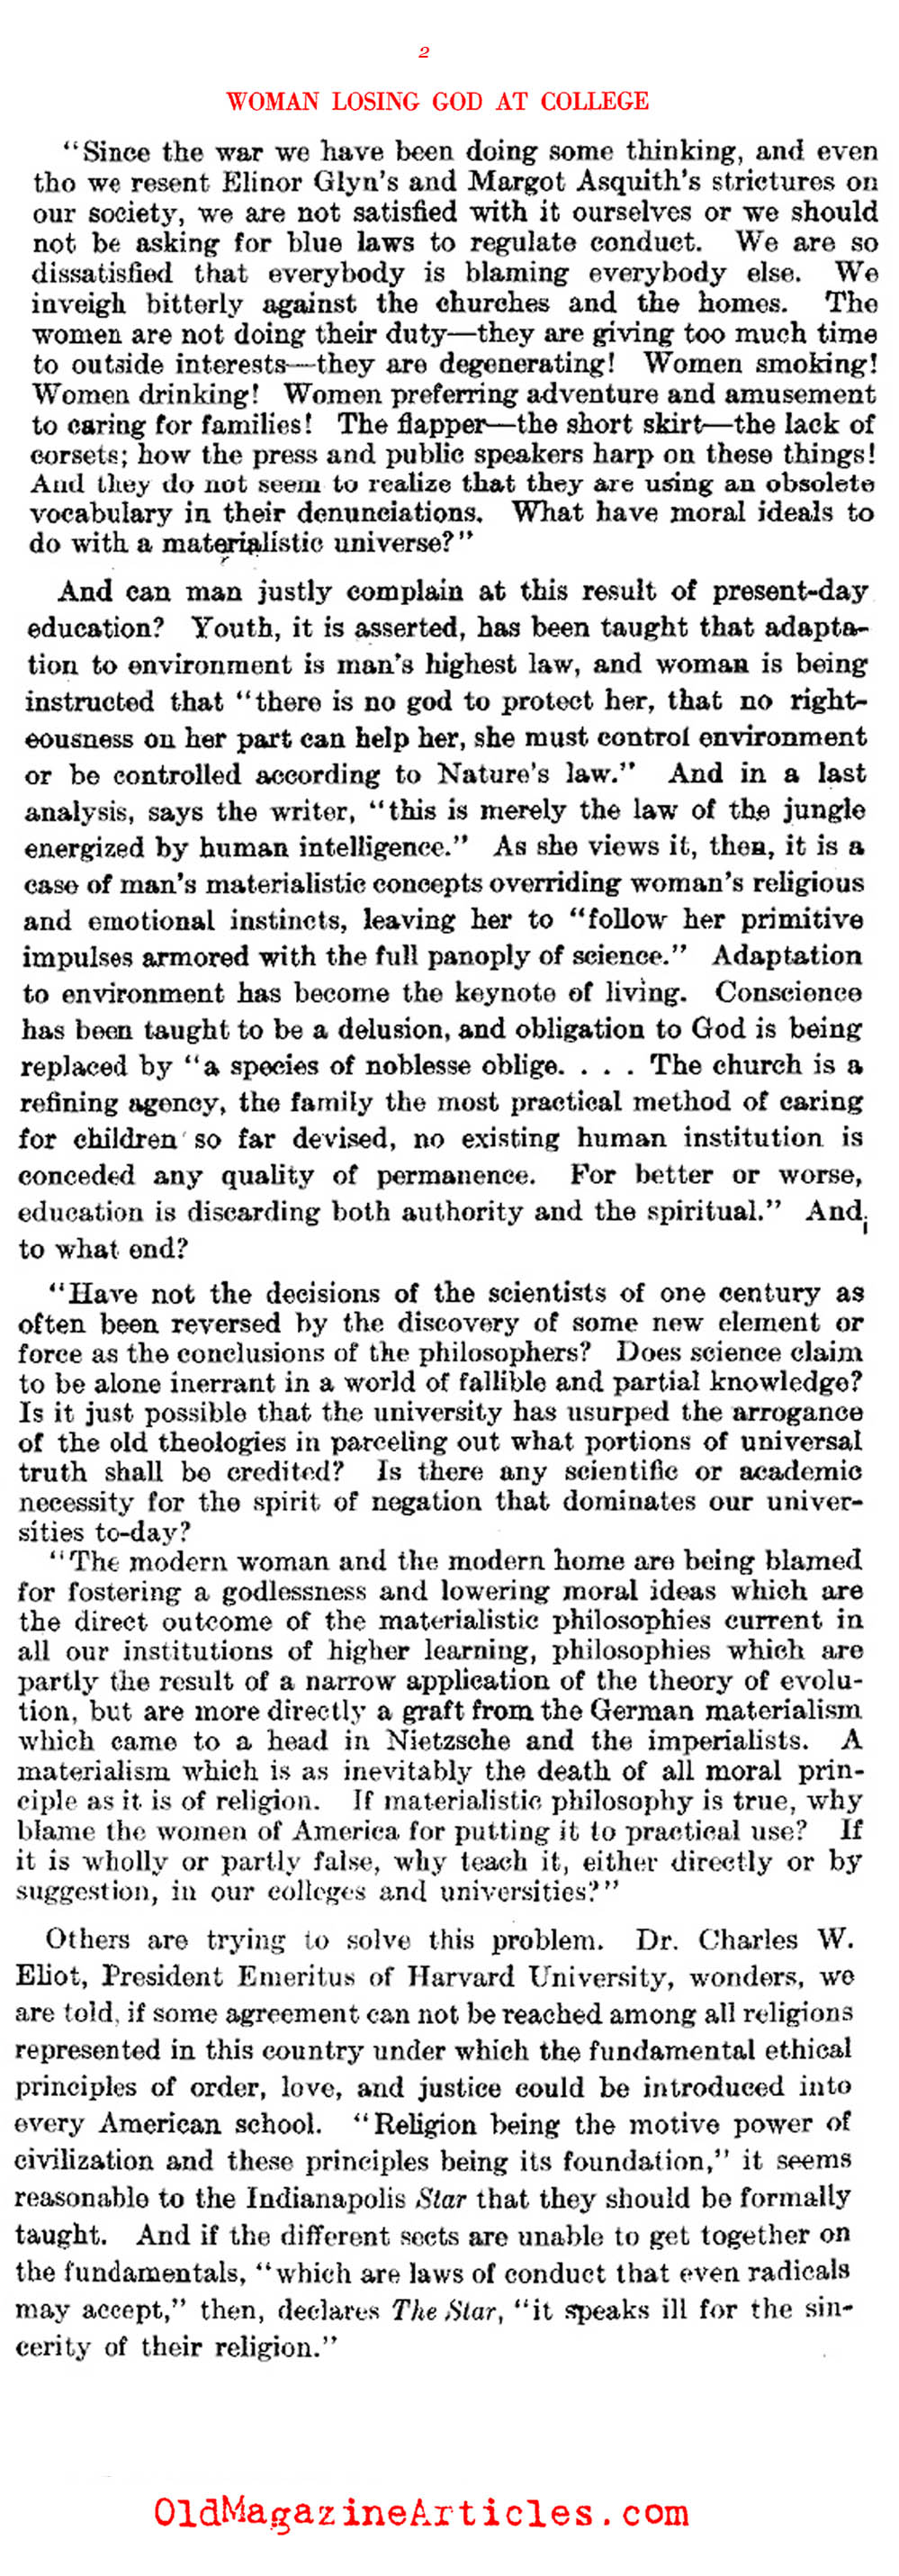 Decline of Religiosity Among College Women <BR>(Literary Digest, 1922)